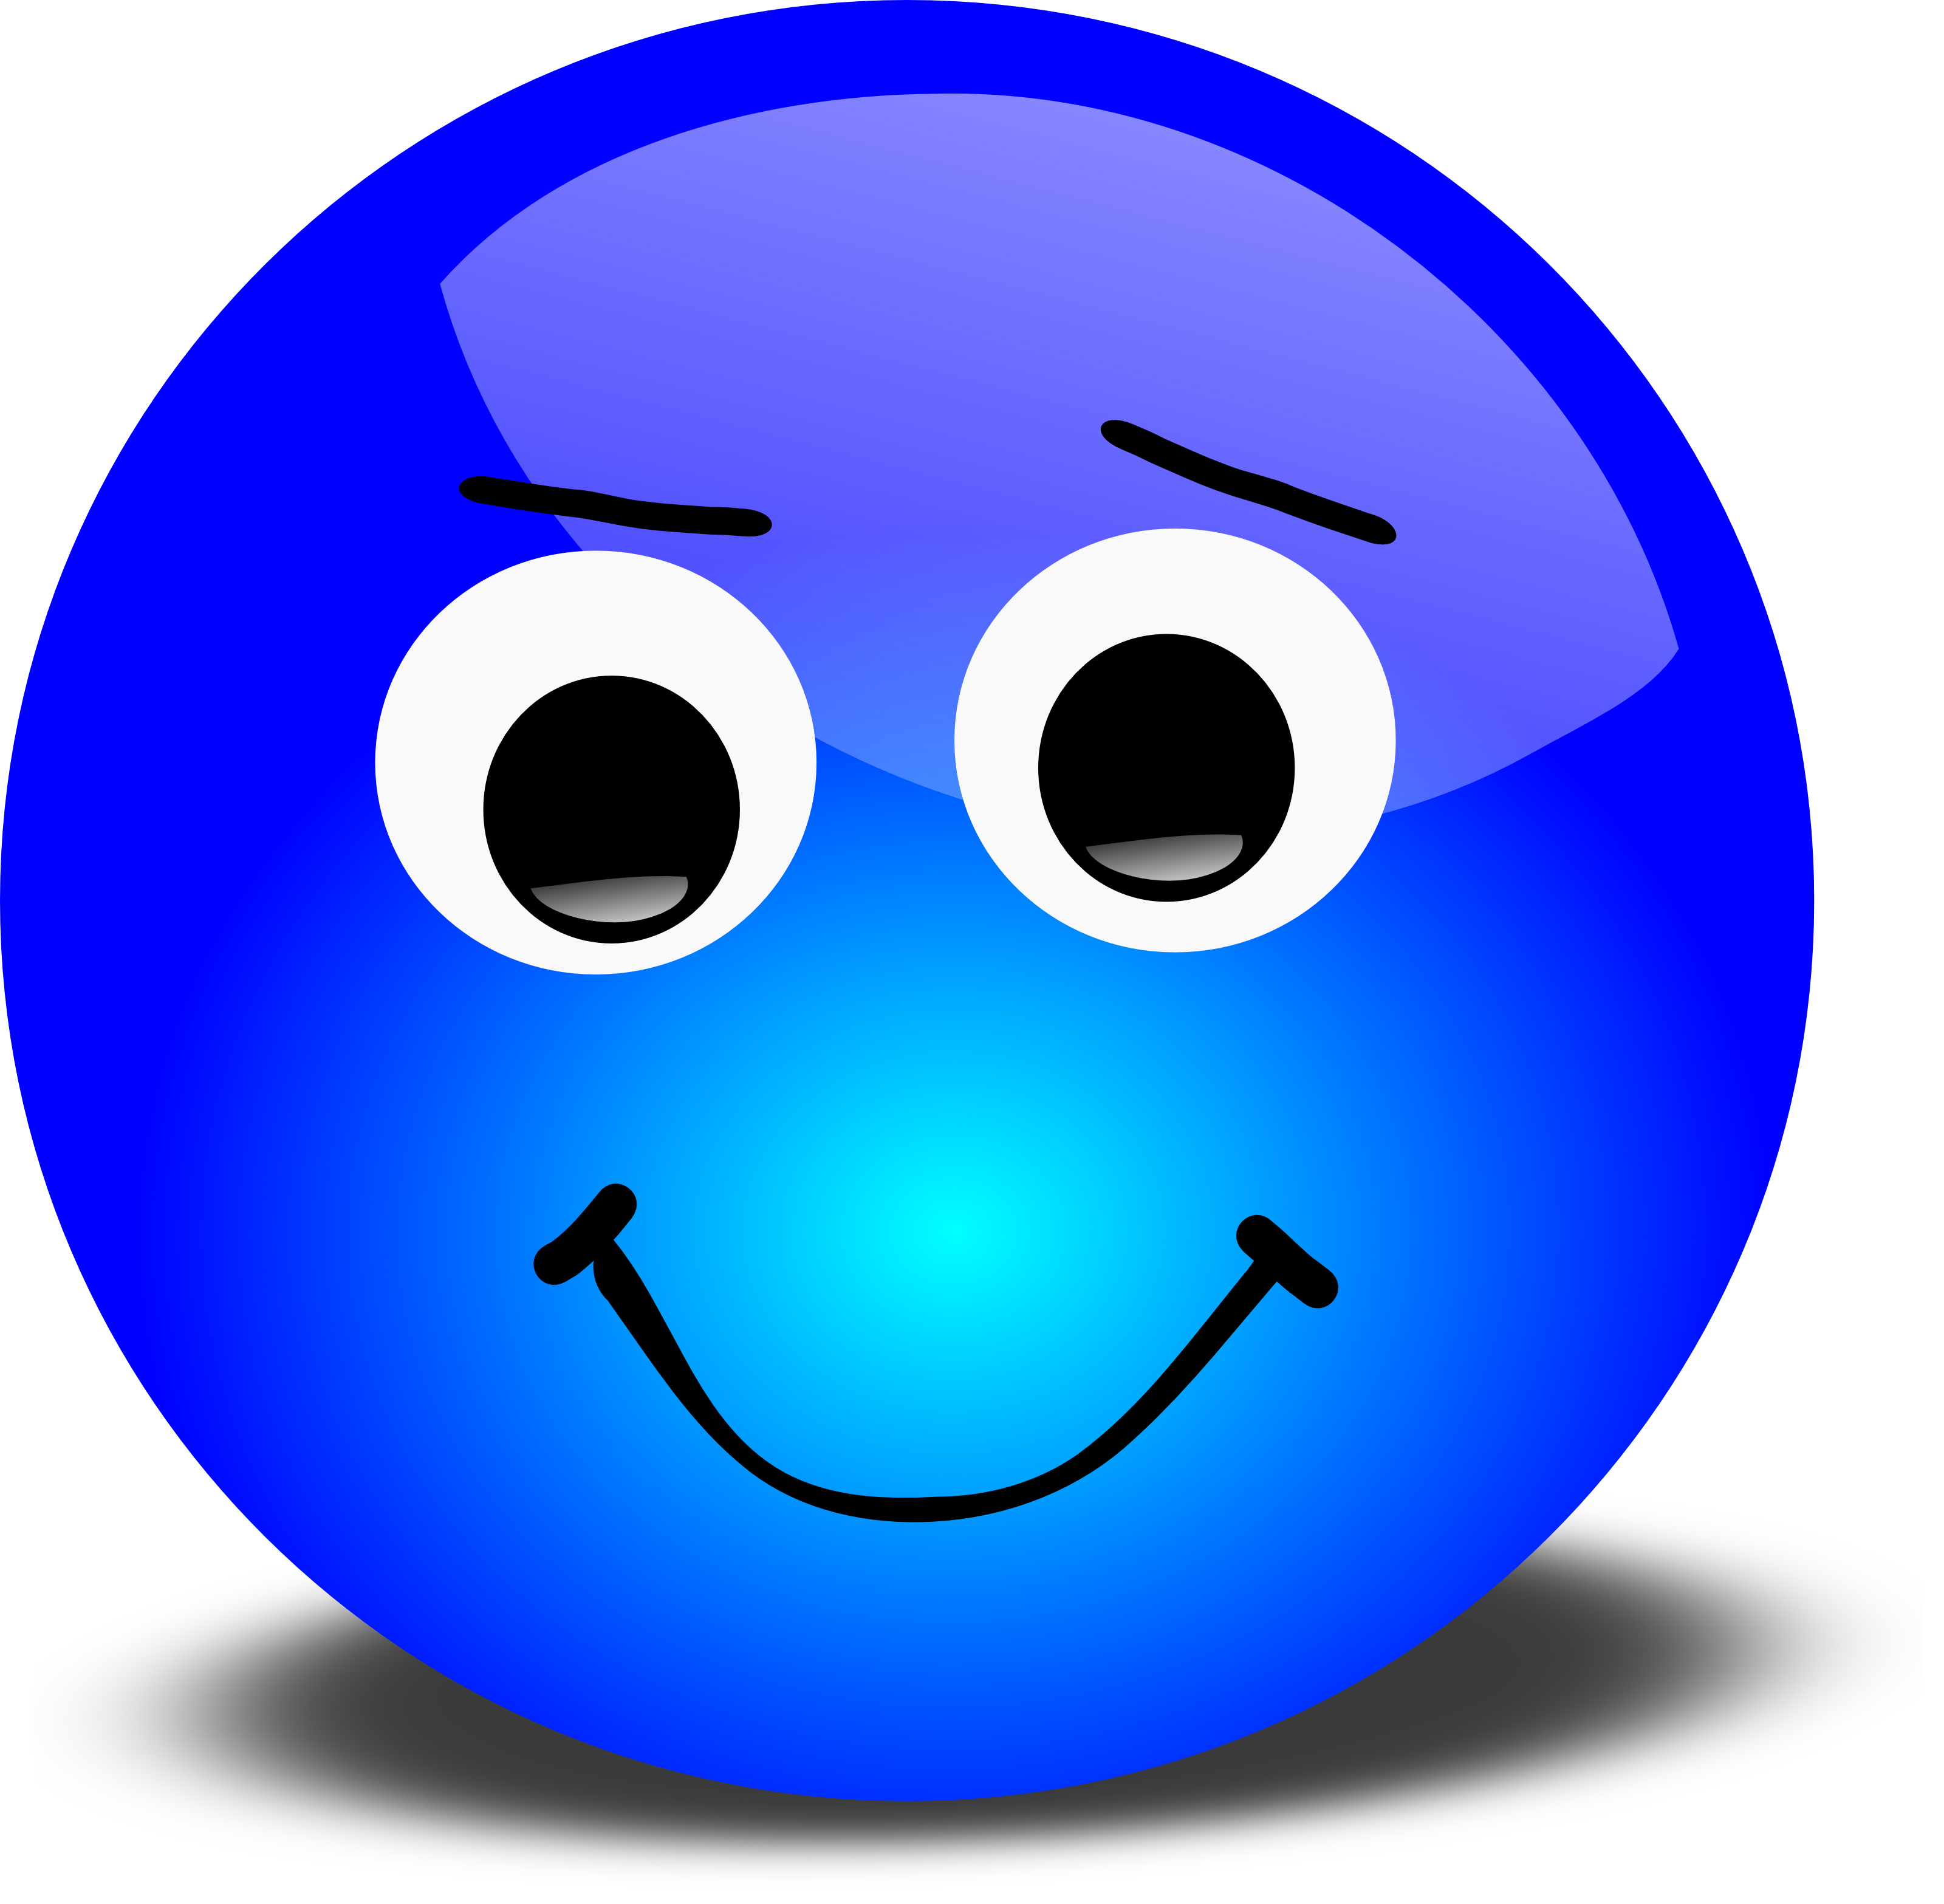 Smiley Face Thumbs Up Animation | Clipart Panda - Free Clipart Images